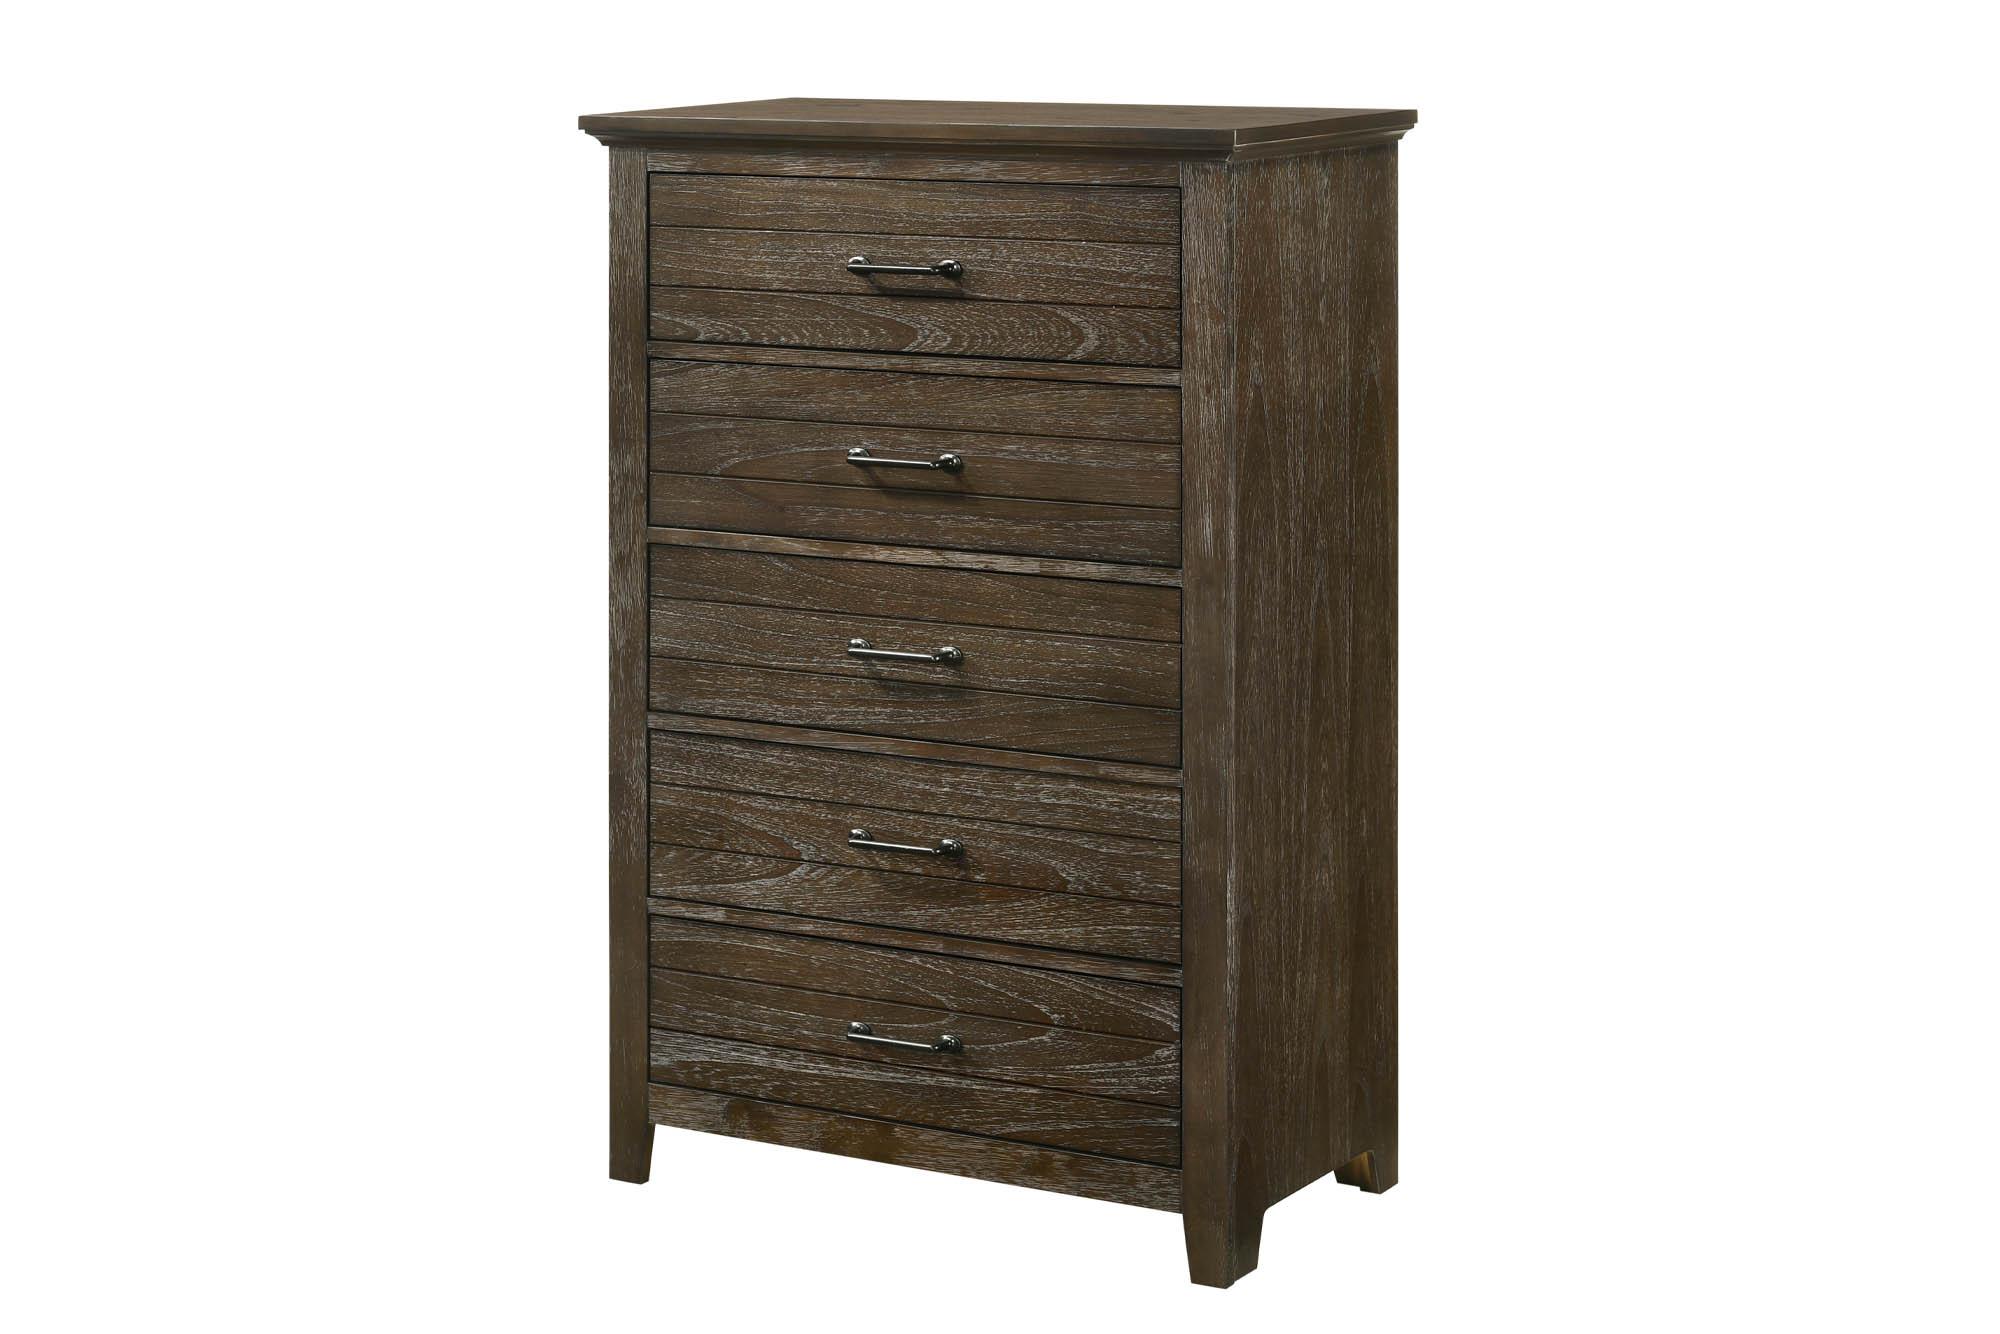 Modern, Transitional Chest AMHERST 1982-150 1982-150 in Brown 